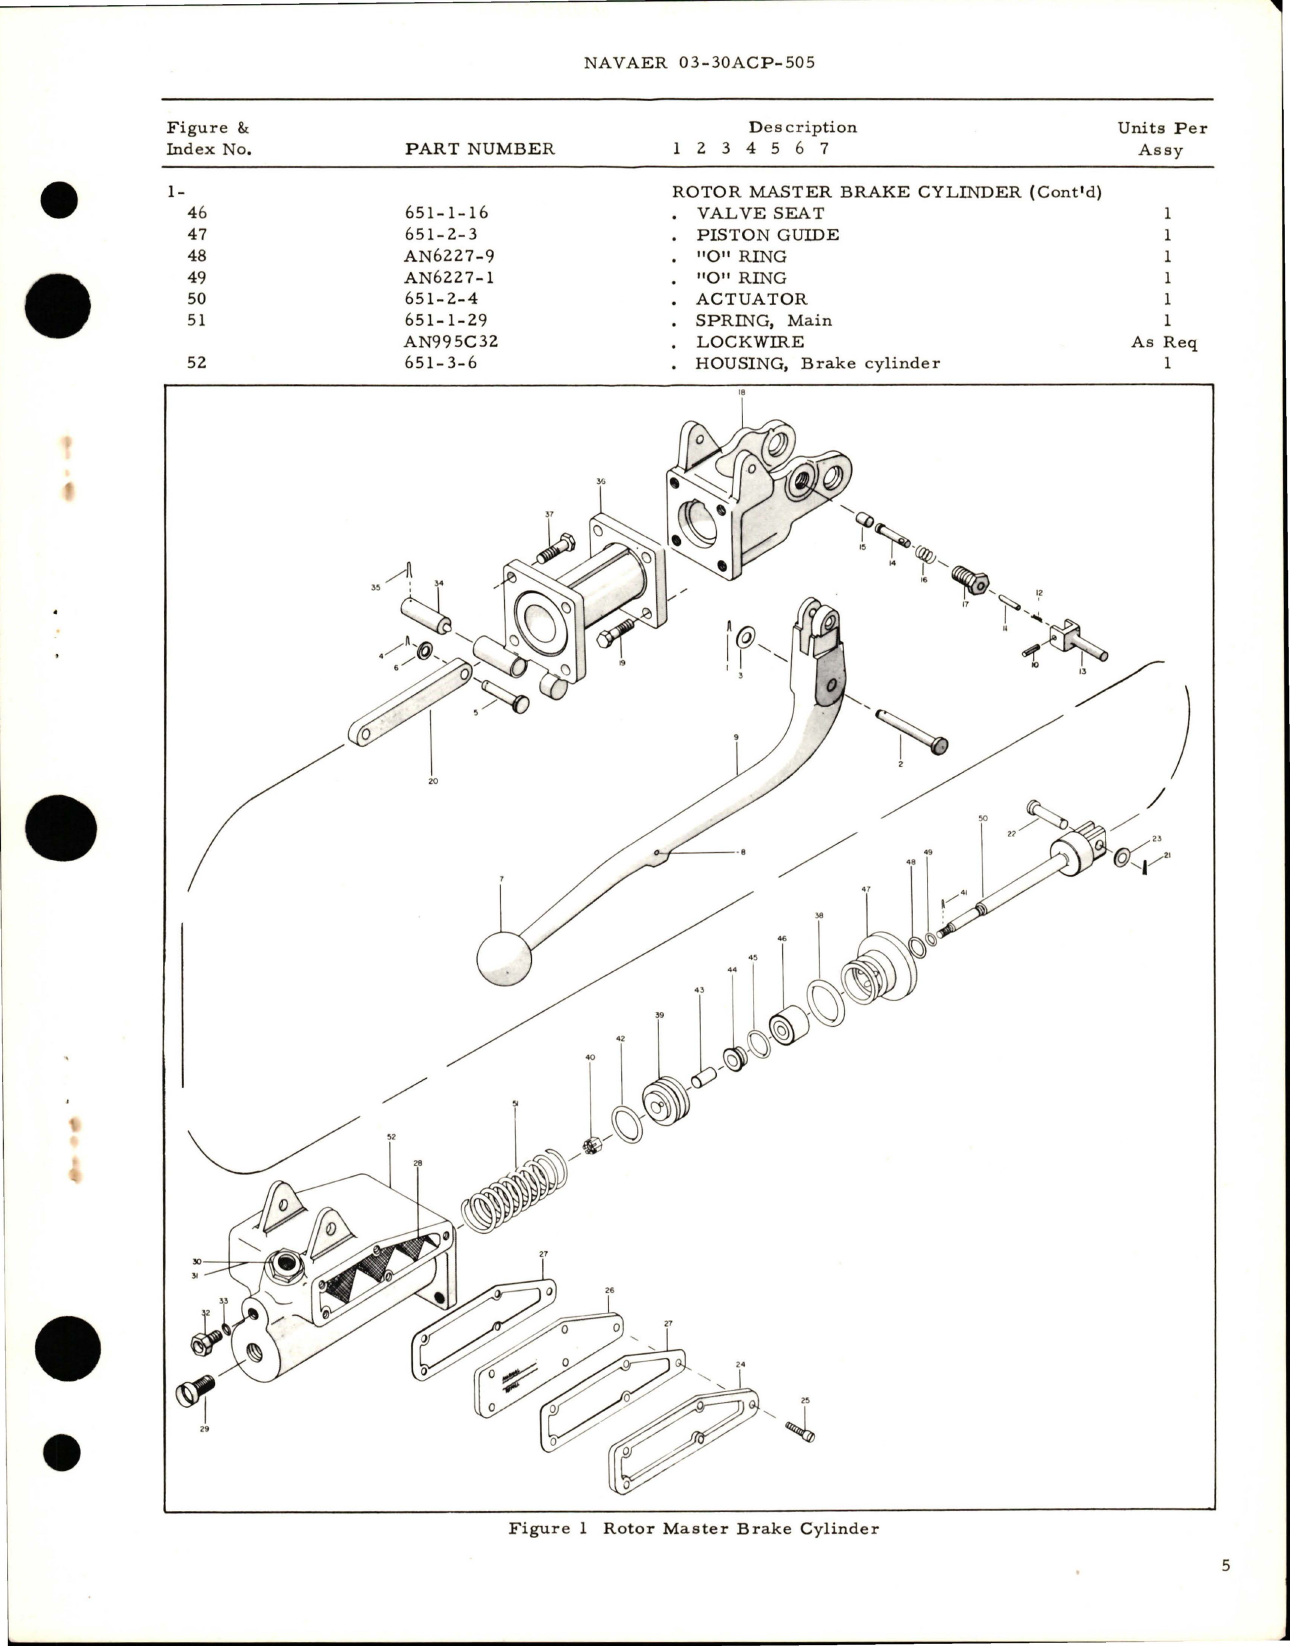 Sample page 5 from AirCorps Library document: Overhaul Instructions with Parts Breakdown for Rotor Master Brake Cylinder - Model 651